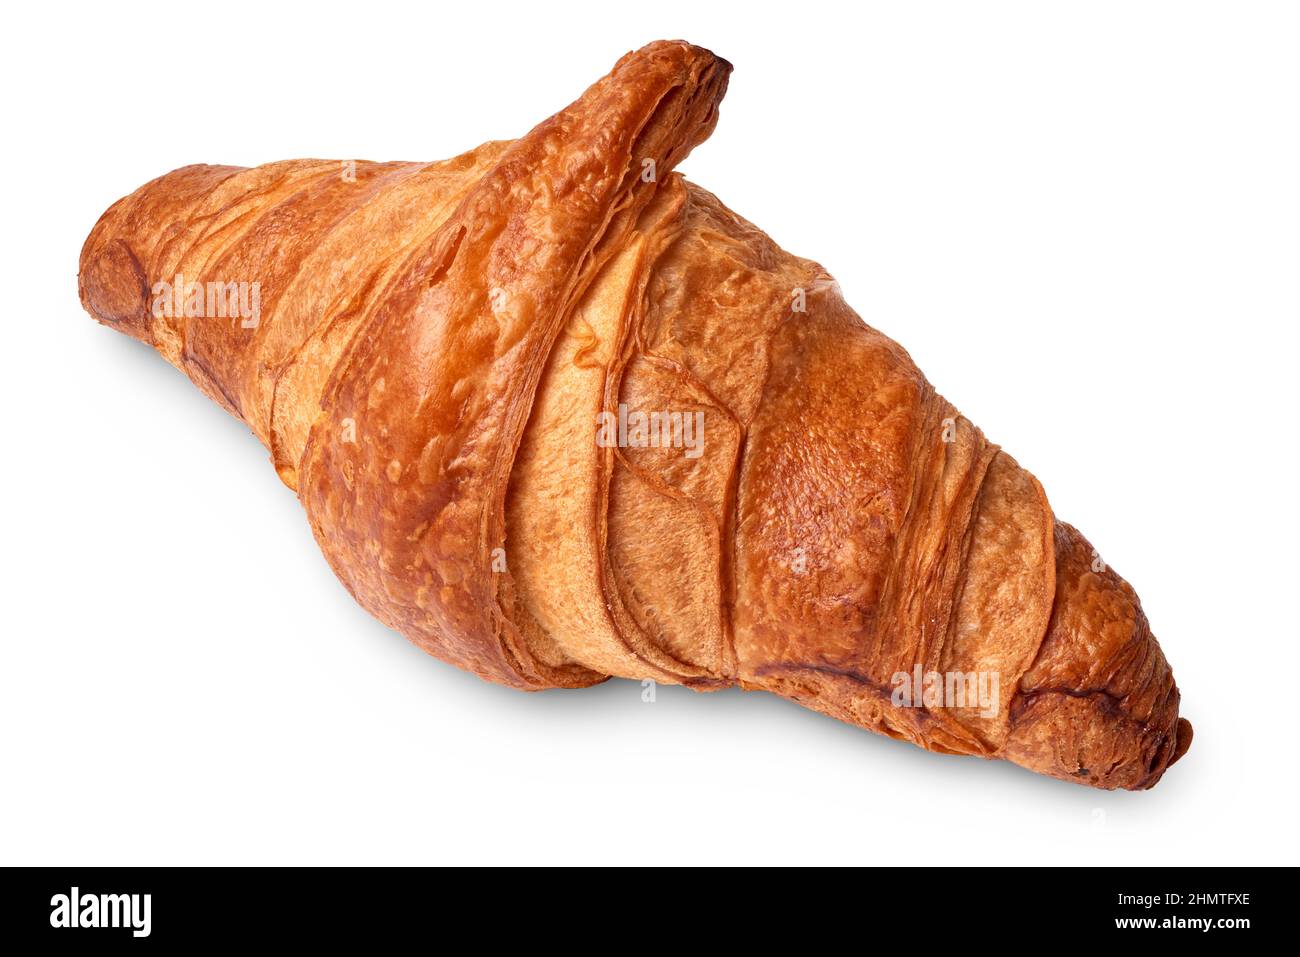 Isolated objects: traditional croissant, French puff pastry bakery, on white background Stock Photo